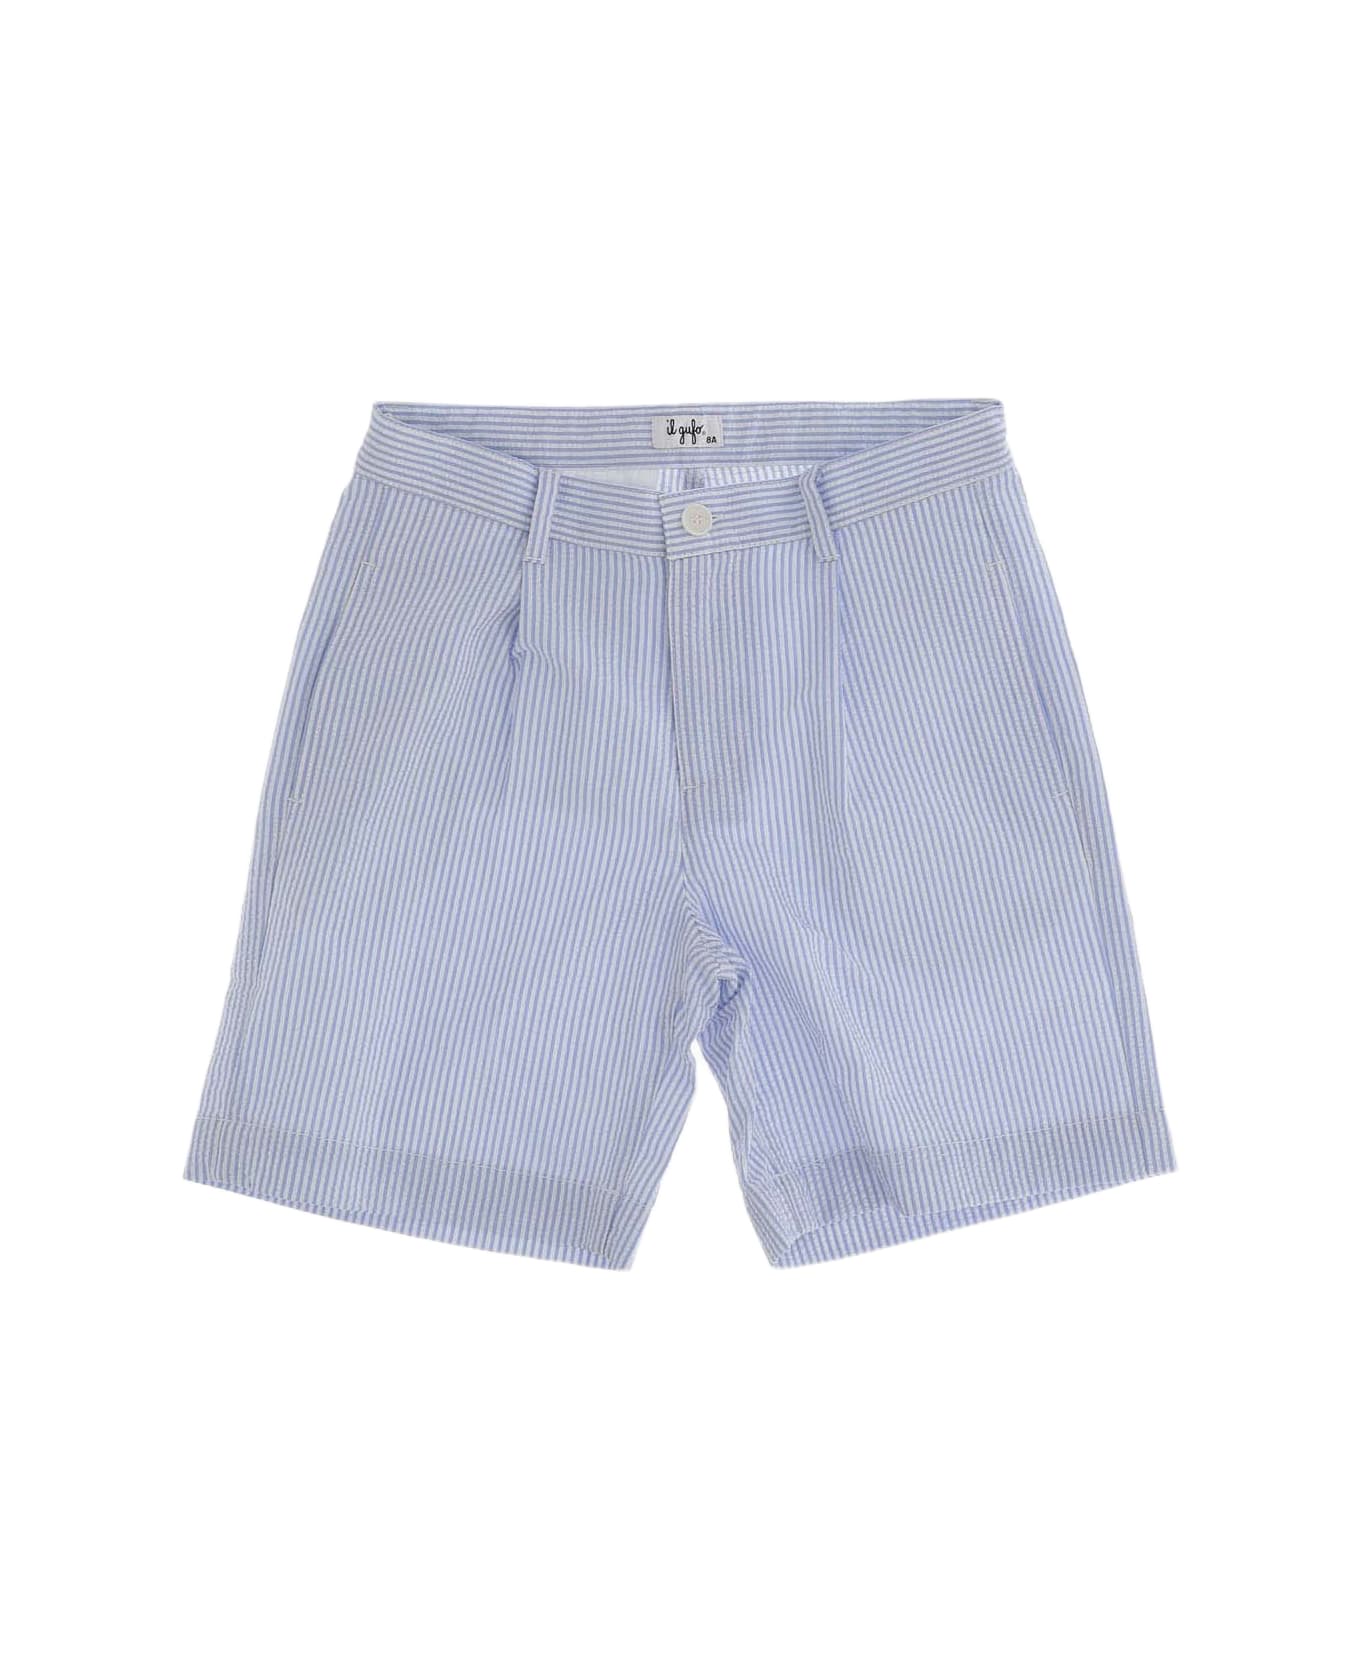 Il Gufo Cotton Short Pants With Striped Pattern - Clear Blue ボトムス